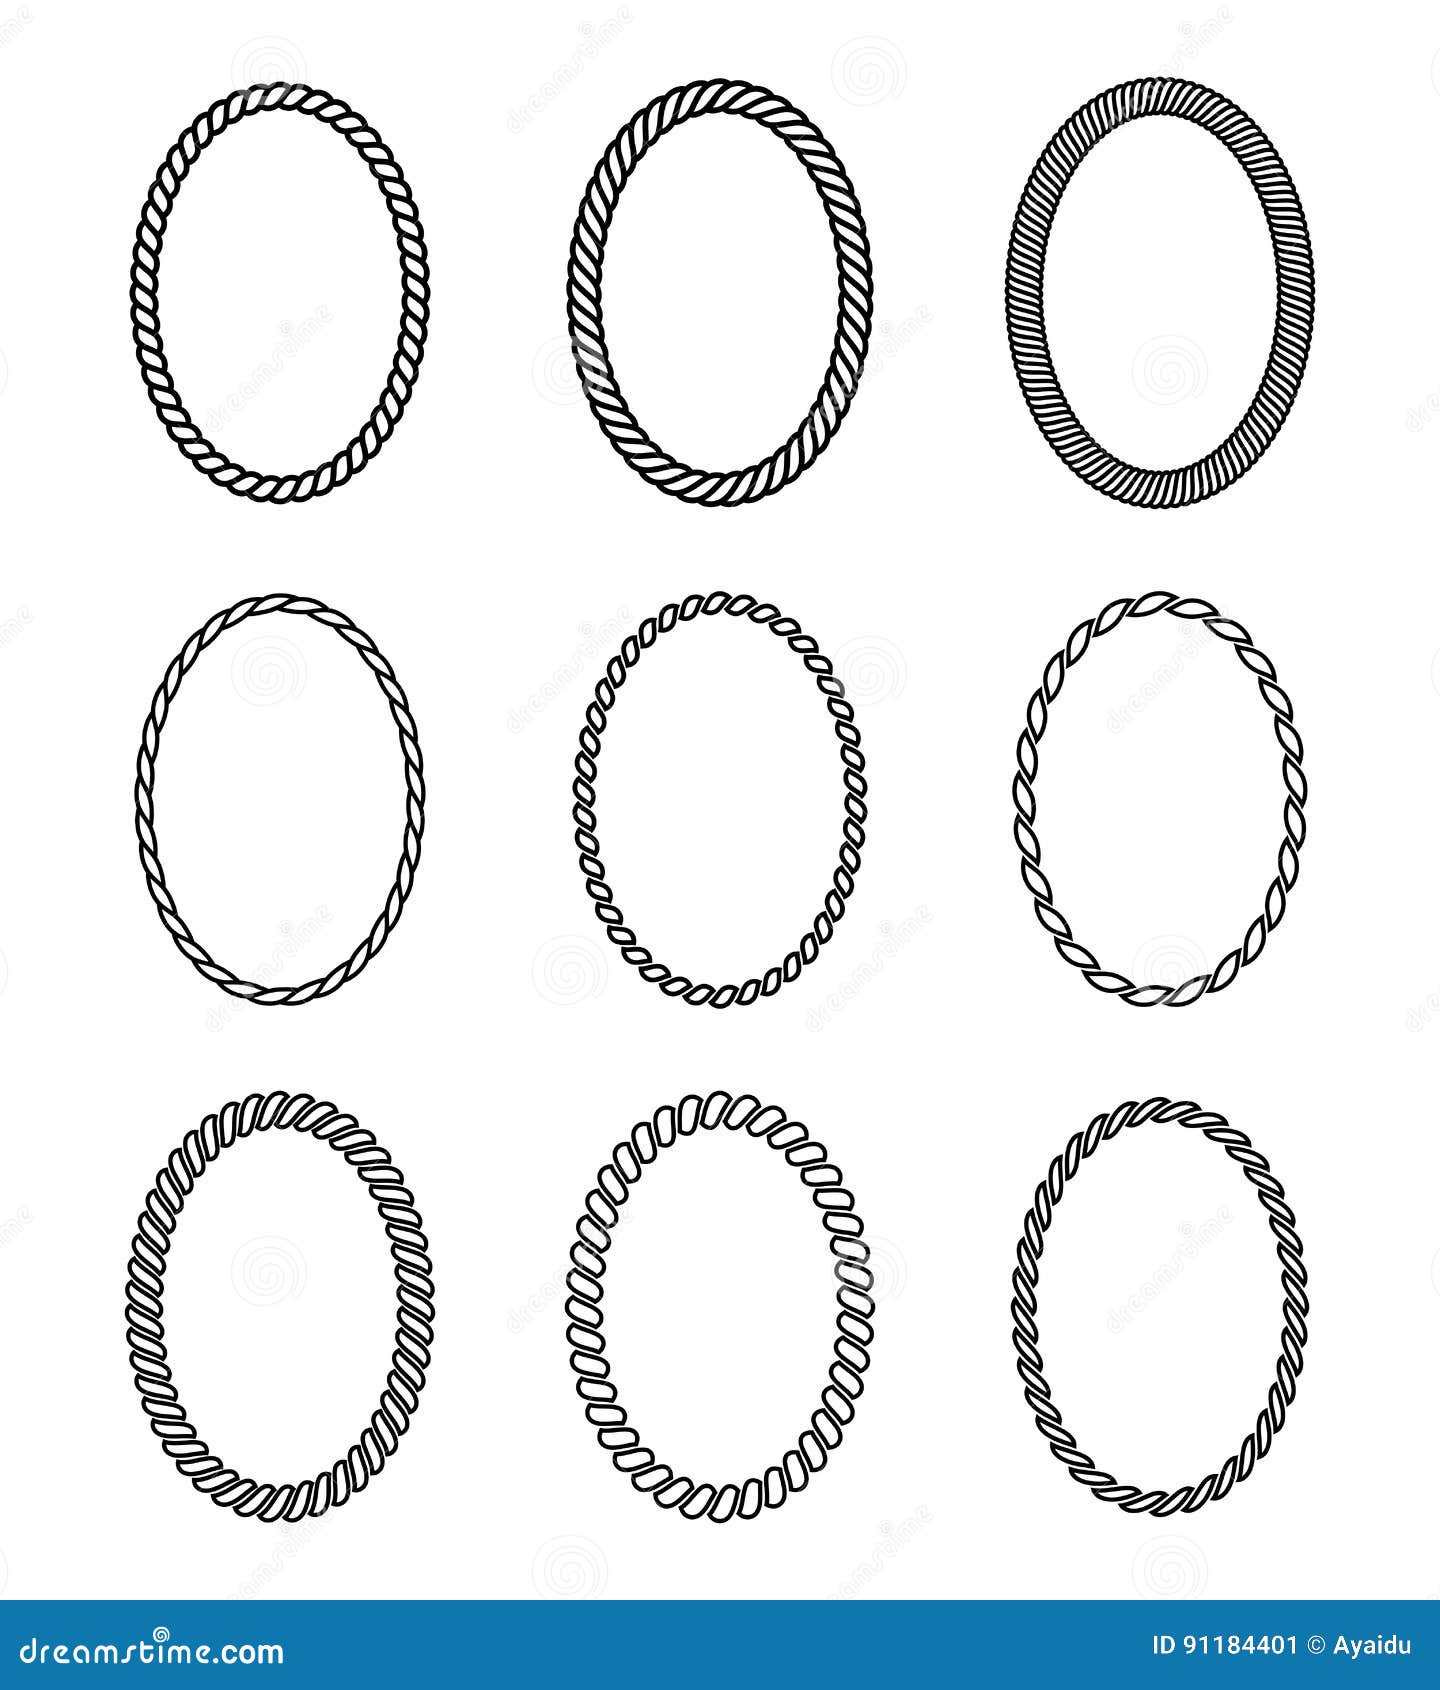 rope set of oval frames. collection of thick and thin bor